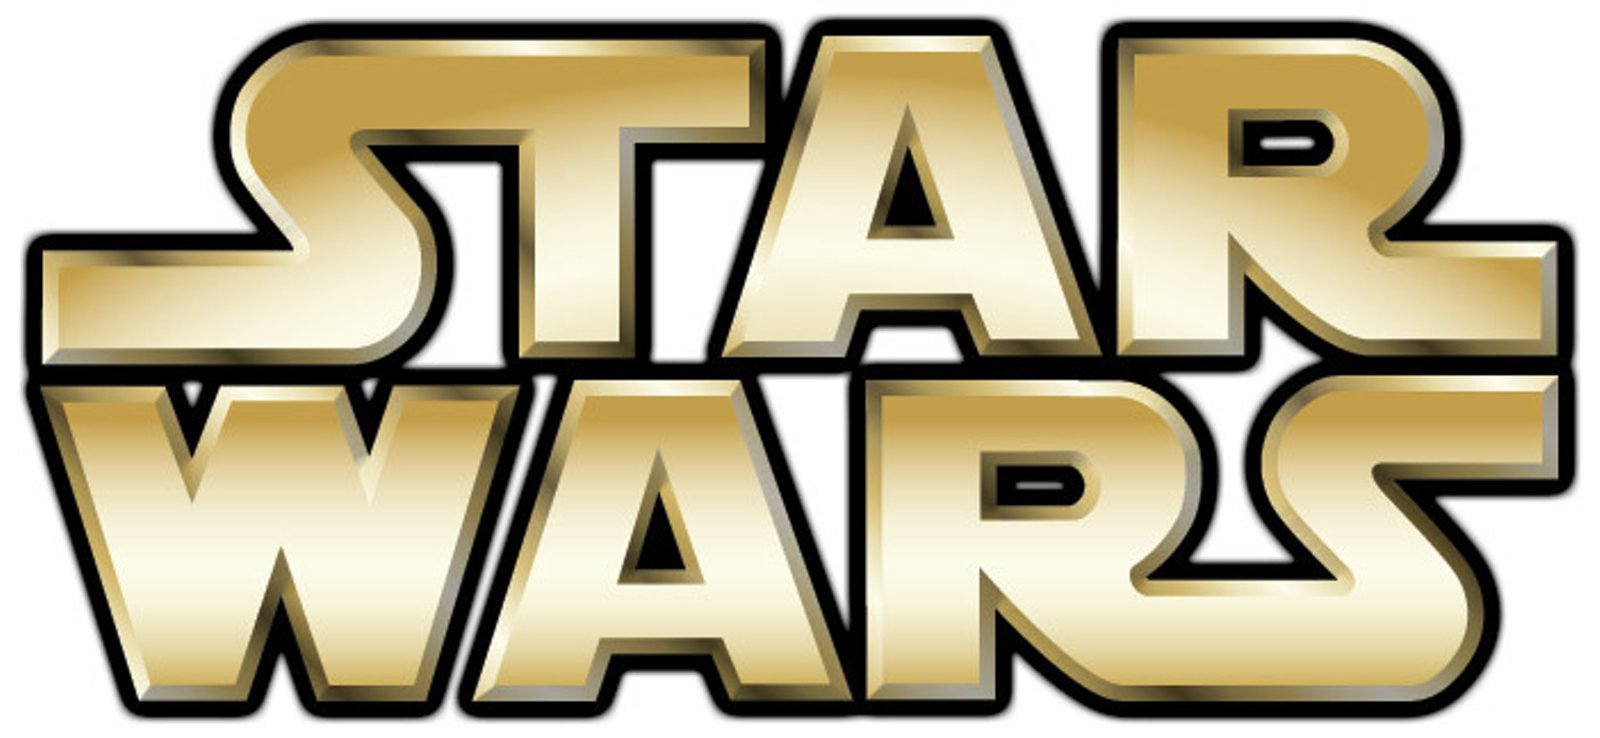 Star Wars Looks to the Future – comicpop library